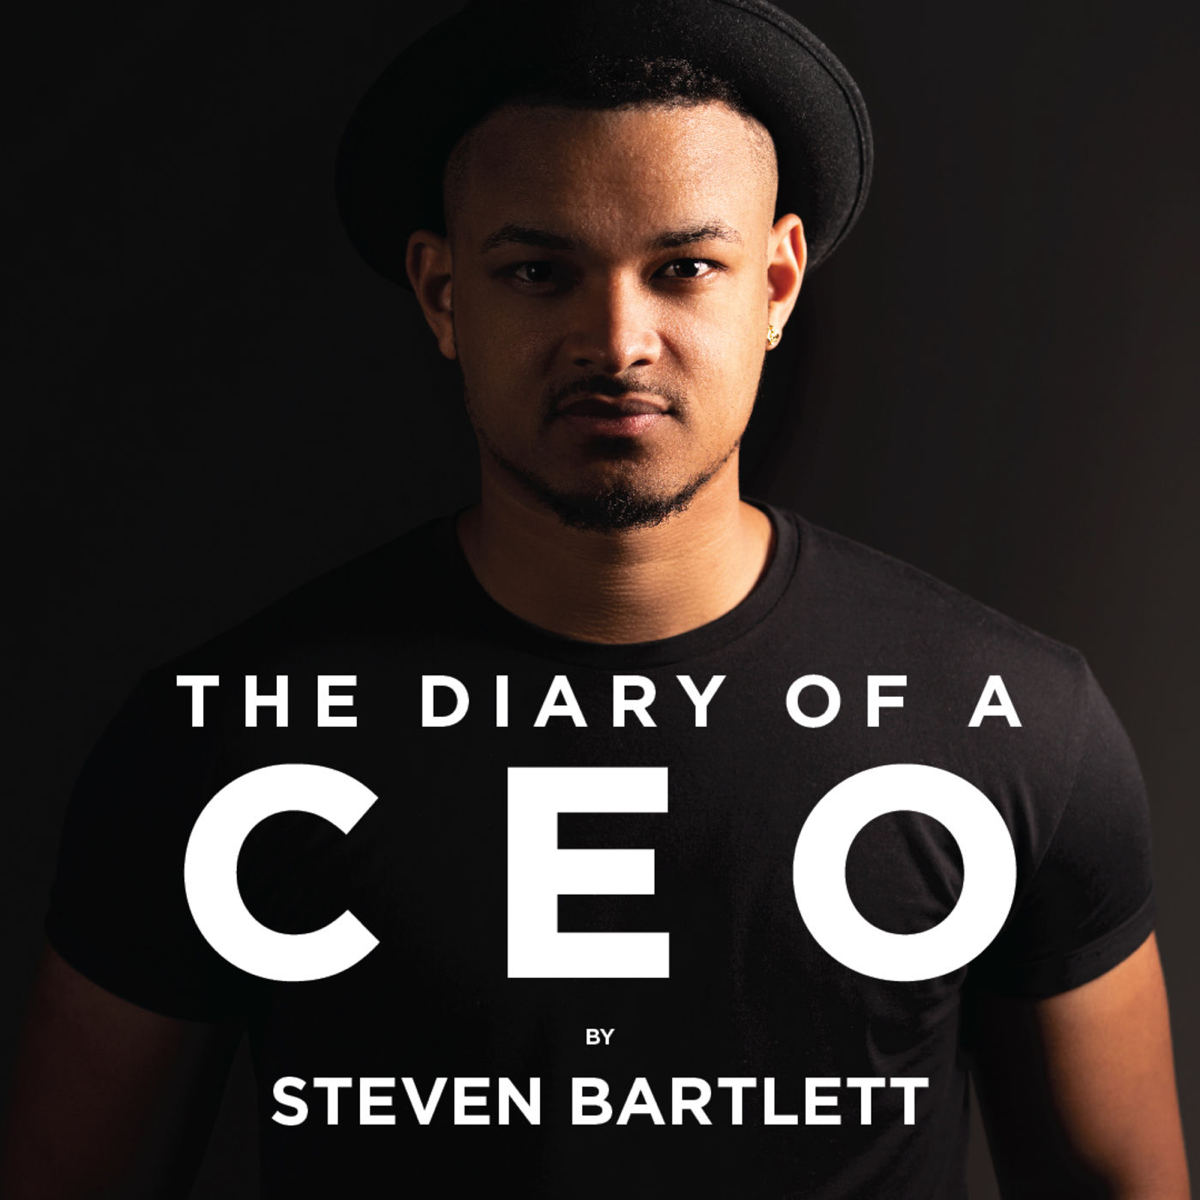 Diary of a ceo